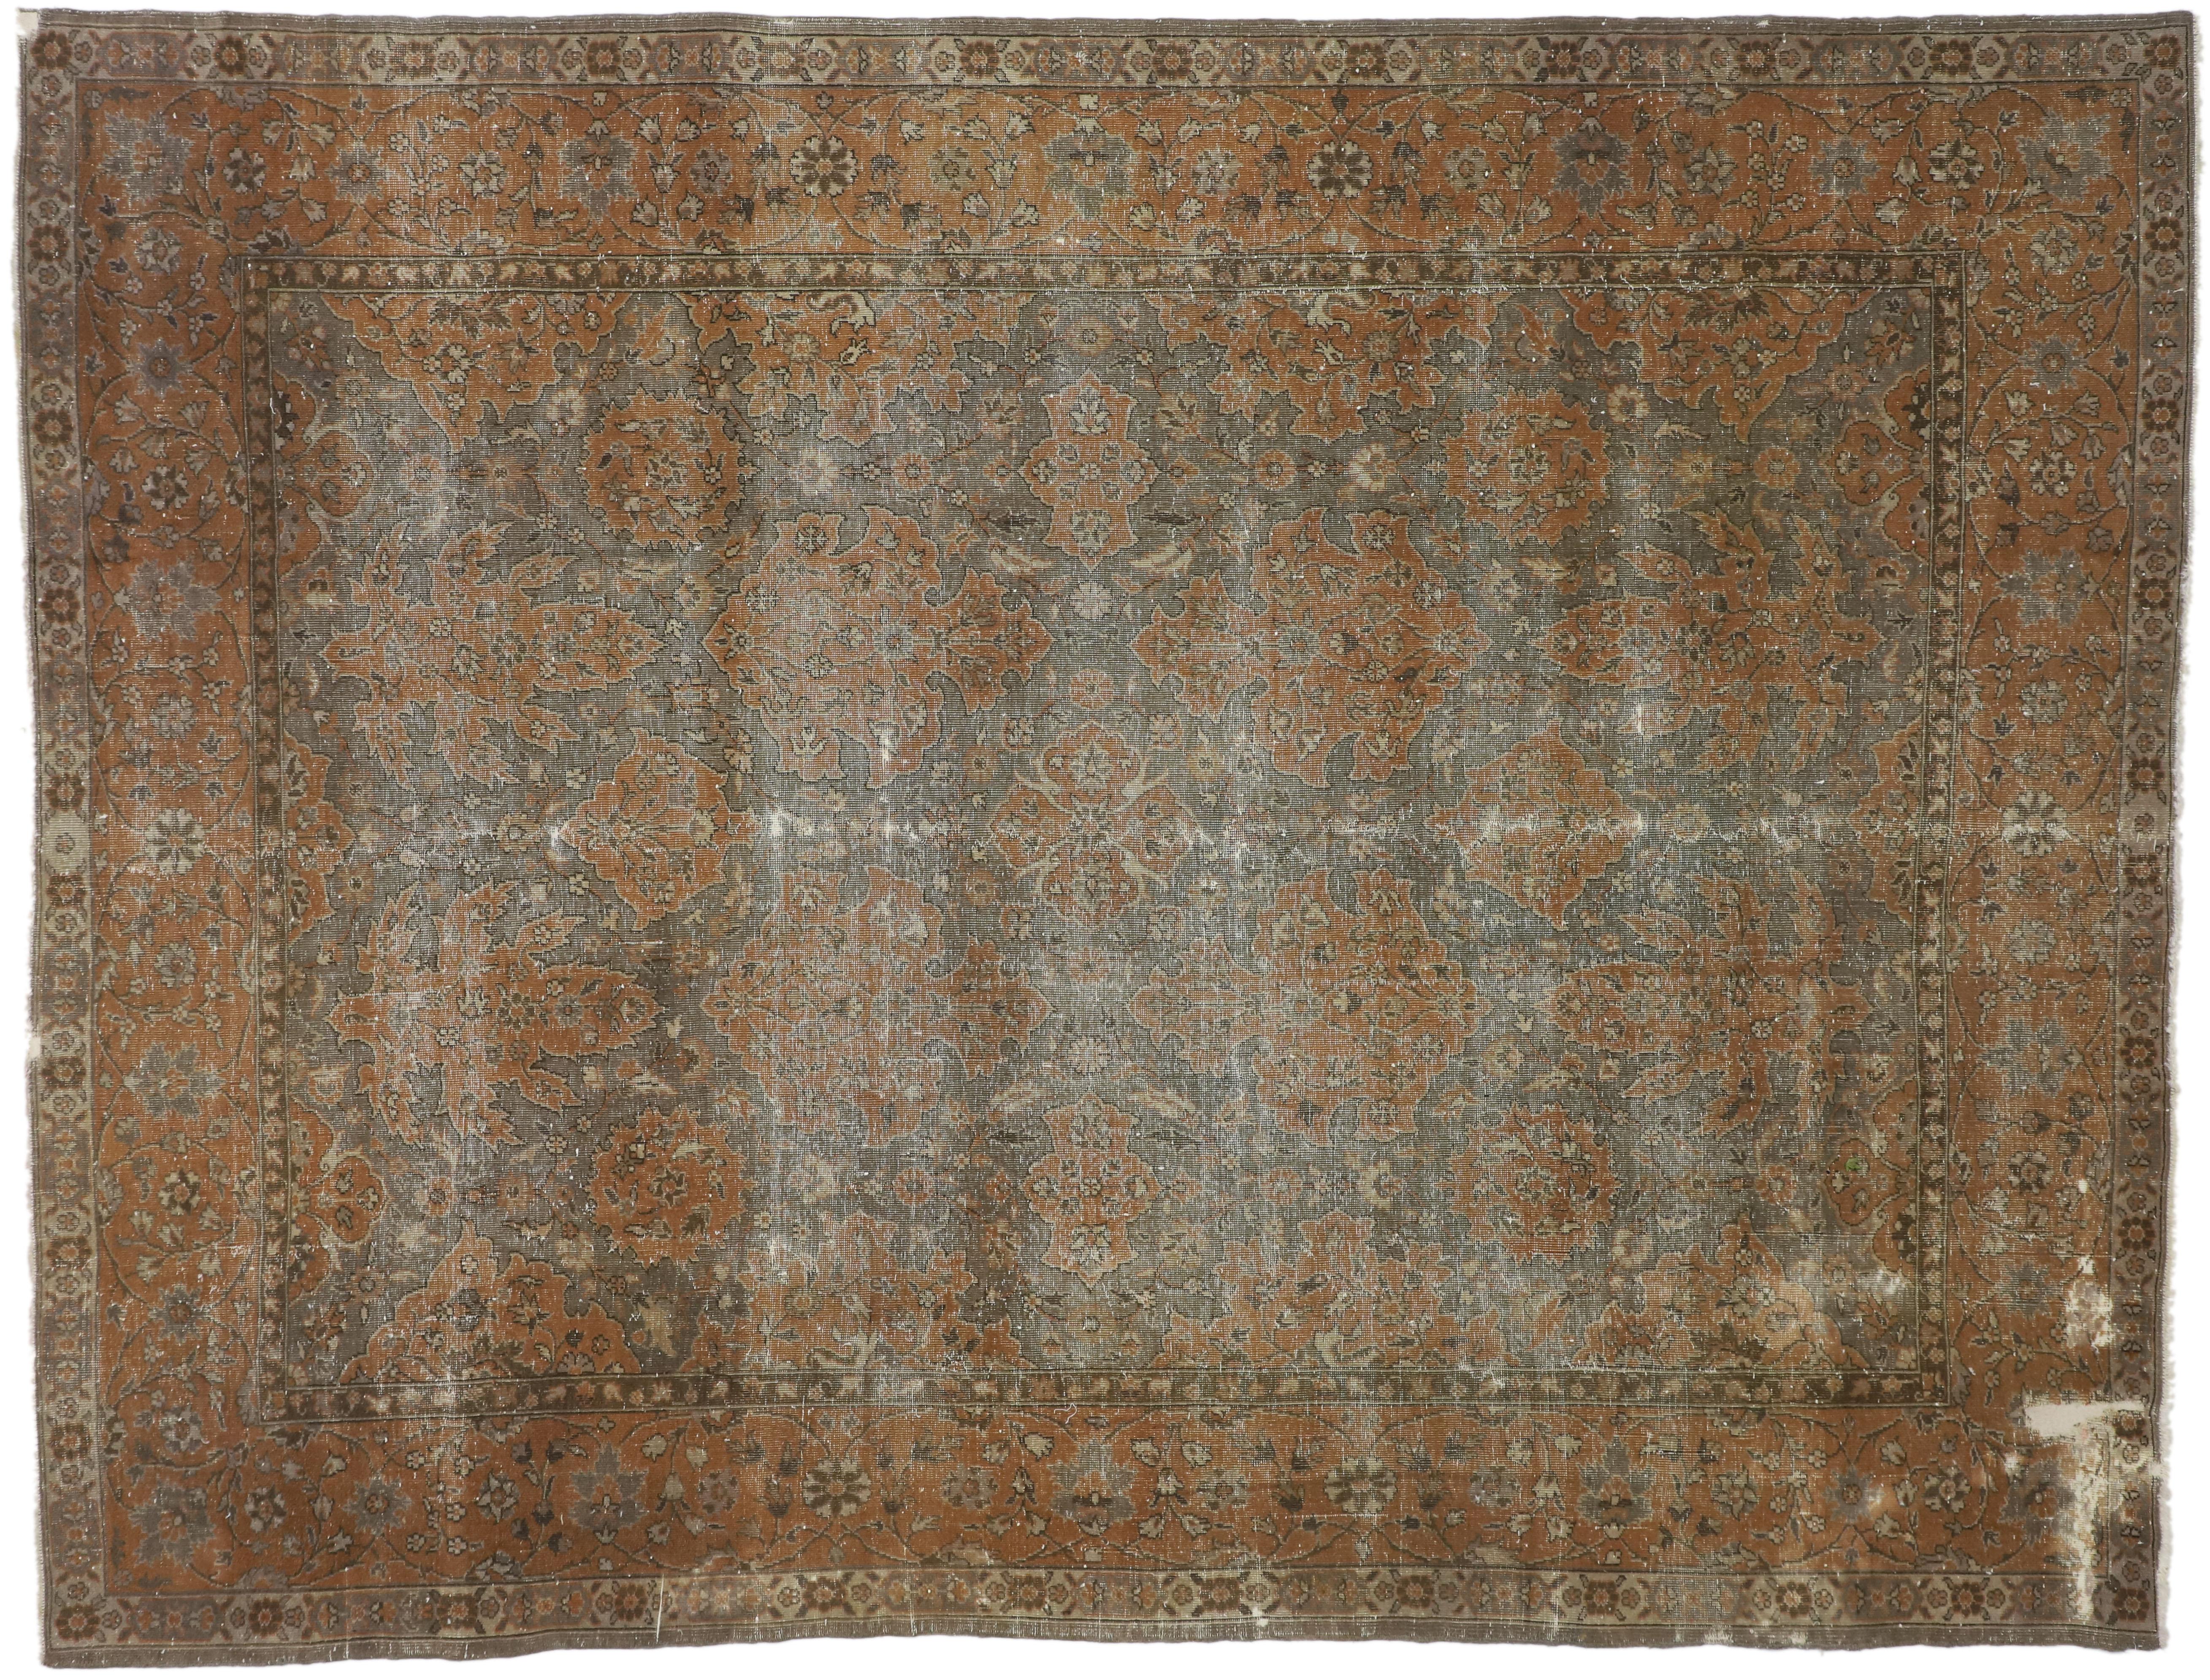 Wool Distressed Antique Turkish Sparta Area Rug with Industrial Machine Age Style